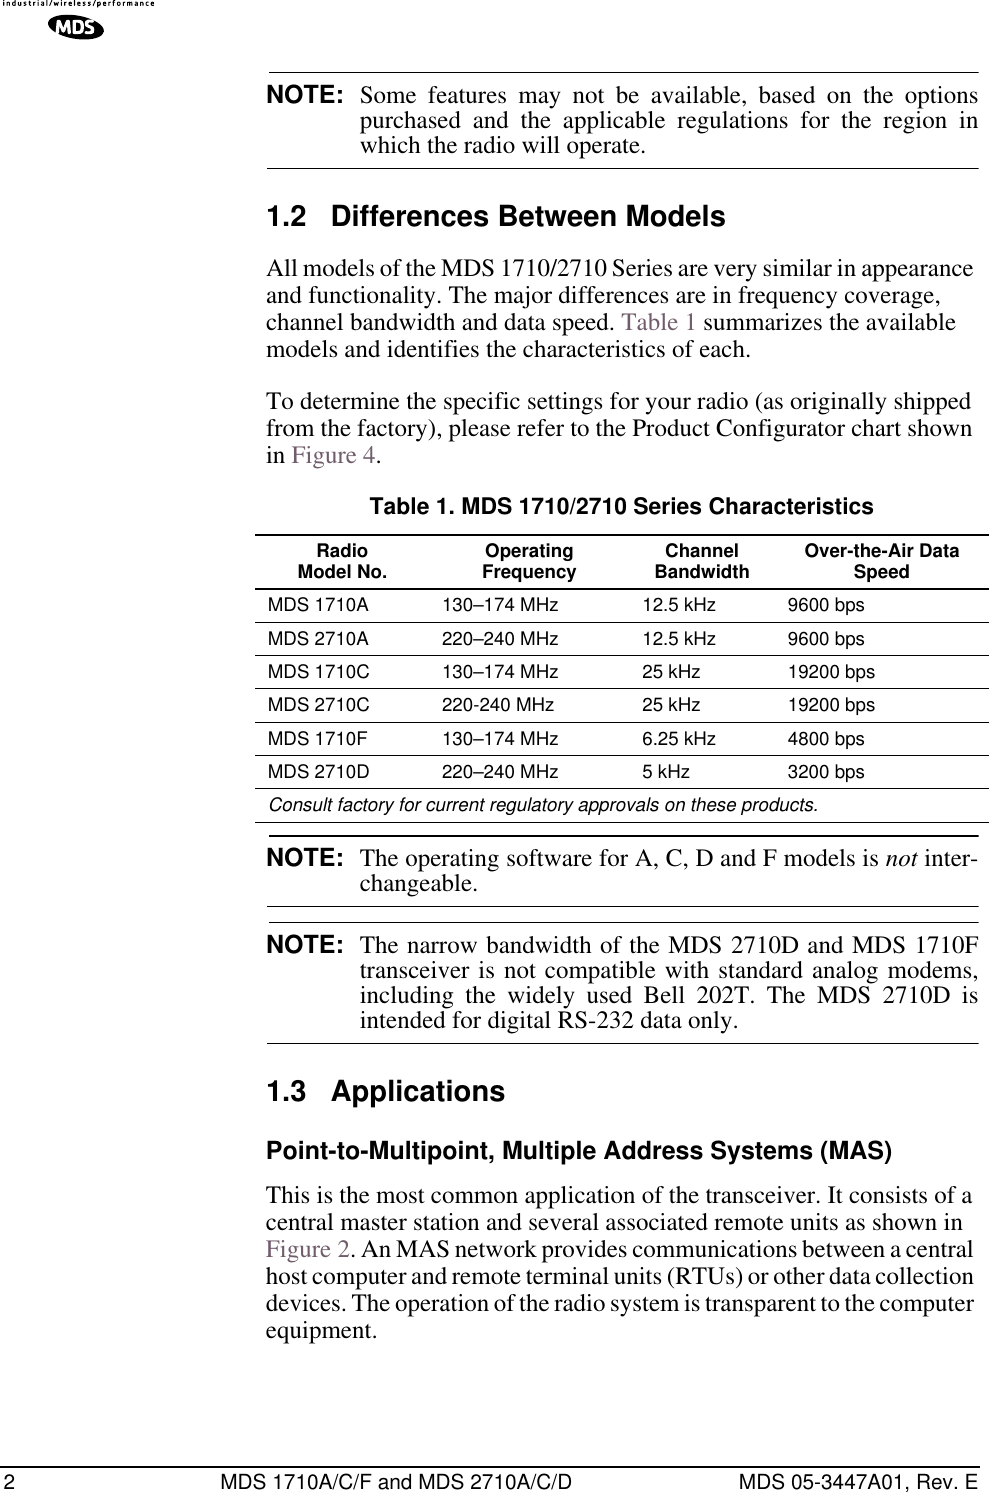  2 MDS 1710A/C/F and MDS 2710A/C/D MDS 05-3447A01, Rev. E NOTE: Some features may not be available, based on the optionspurchased and the applicable regulations for the region in which the radio will operate. 1.2 Differences Between Models All models of the MDS 1710/2710 Series are very similar in appearance and functionality. The major differences are in frequency coverage, channel bandwidth and data speed. Table 1 summarizes the available models and identifies the characteristics of each. To determine the specific settings for your radio (as originally shipped from the factory), please refer to the Product Configurator chart shown in Figure 4.  NOTE: The operating software for A, C, D and F models is  not  inter- changeable. NOTE: The narrow bandwidth of the MDS 2710D and MDS 1710Ftransceiver is not compatible with standard analog modems,including the widely used Bell 202T. The MDS 2710D is intended for digital RS-232 data only. 1.3 Applications Point-to-Multipoint, Multiple Address Systems (MAS) This is the most common application of the transceiver. It consists of a central master station and several associated remote units as shown in Figure 2. An MAS network provides communications between a central host computer and remote terminal units (RTUs) or other data collection devices. The operation of the radio system is transparent to the computer equipment. Table 1. MDS 1710/2710 Series Characteristics Radio Model No. Operating Frequency Channel Bandwidth Over-the-Air Data Speed MDS 1710A 130–174 MHz 12.5 kHz 9600 bpsMDS 2710A 220–240 MHz 12.5 kHz 9600 bpsMDS 1710C 130–174 MHz 25 kHz 19200 bpsMDS 2710C 220-240 MHz 25 kHz 19200 bpsMDS 1710F 130–174 MHz 6.25 kHz 4800 bpsMDS 2710D 220–240 MHz 5 kHz 3200 bps Consult factory for current regulatory approvals on these products.